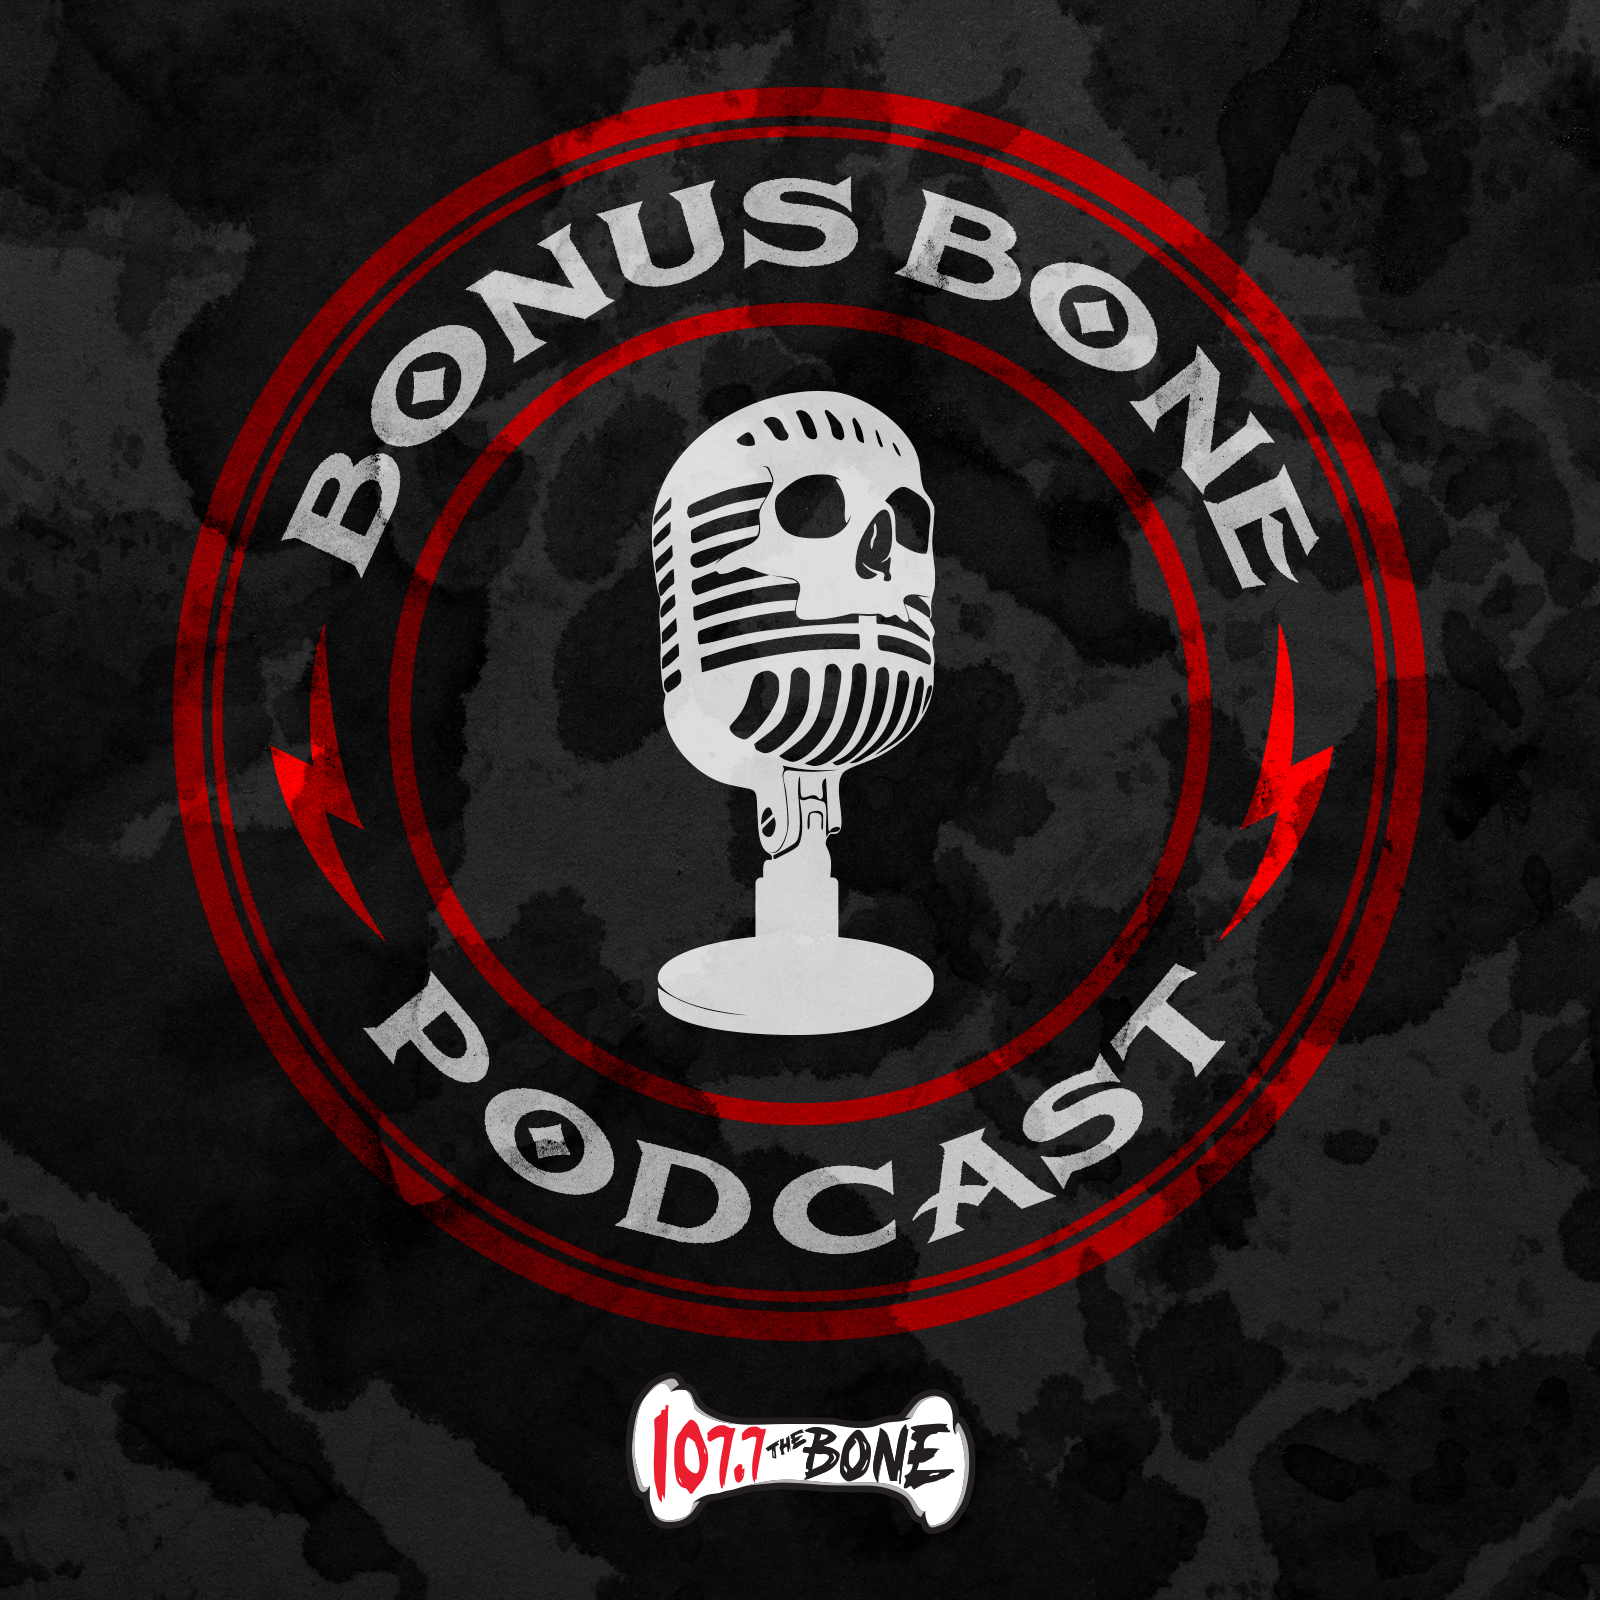 The Bonus Bone: The Older You Get The More You Hate What?